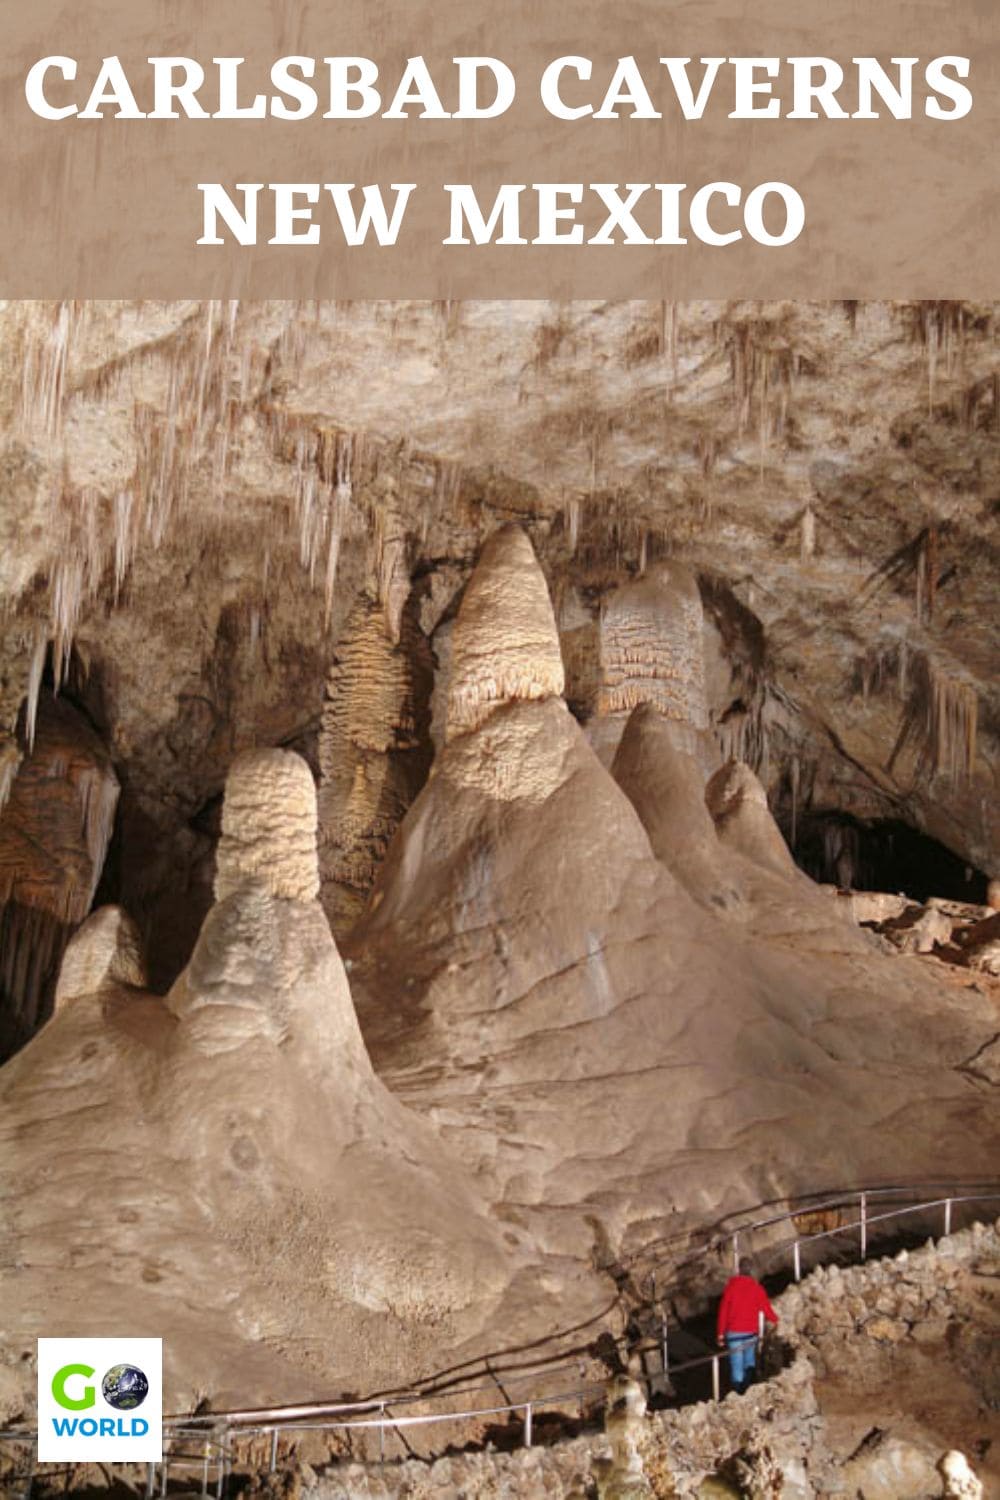 Carlsbad Caverns in New Mexico is a place of wonder with caves full of dazzling formations and sights like the Painted Grotto and Giant Dome. #newmexico #carlsbadcaverns